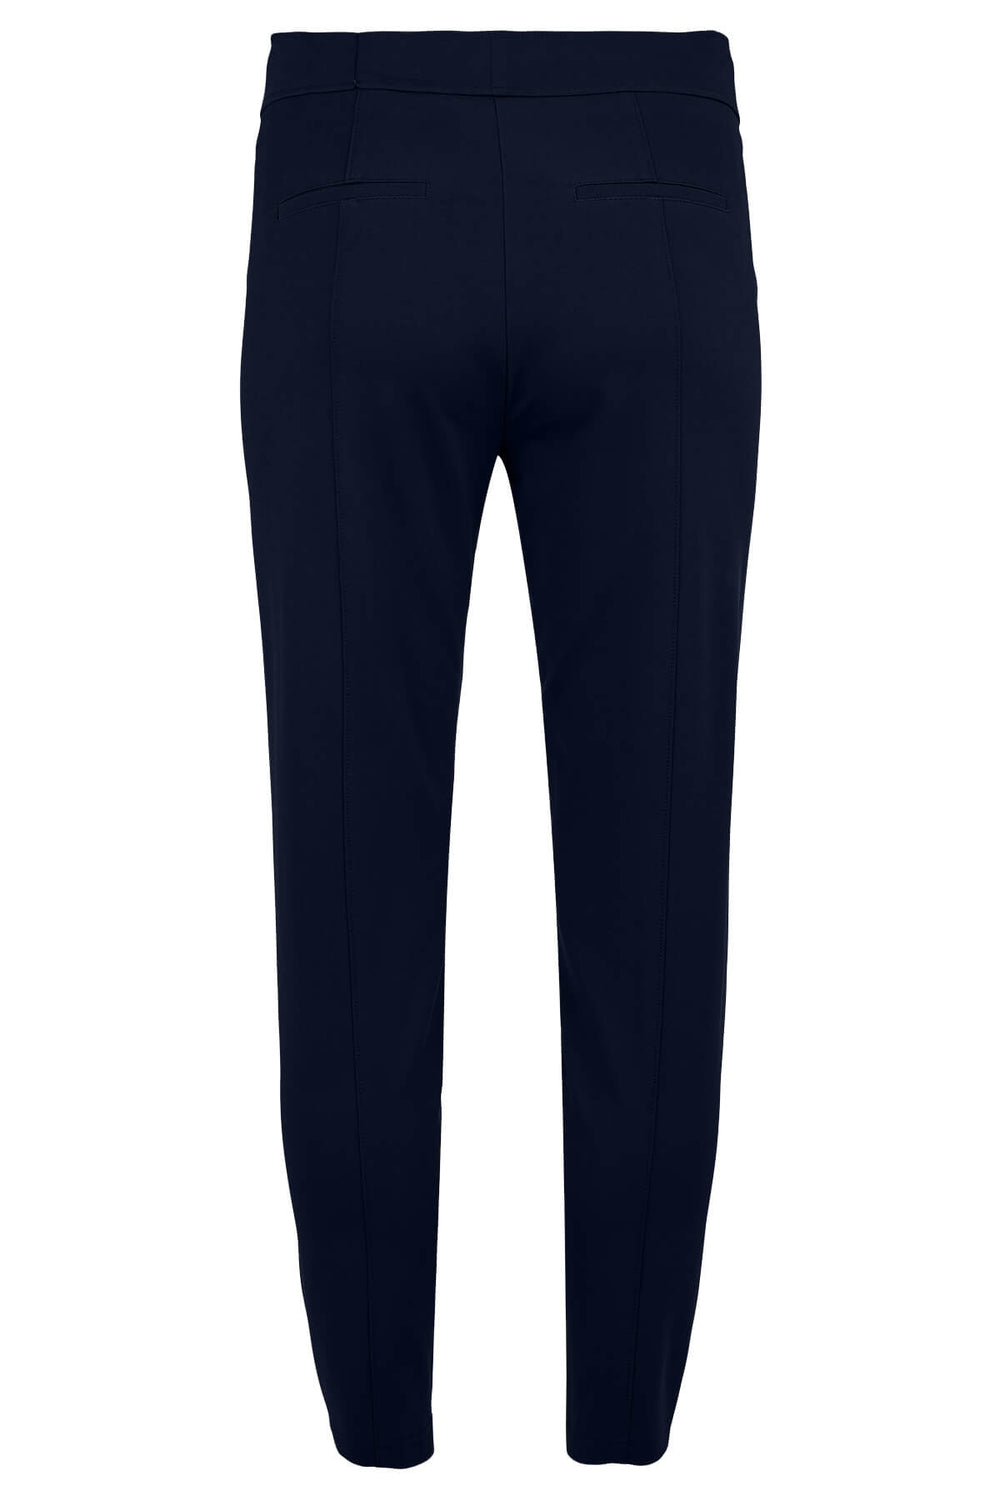 Robell Hygge 52575 54942 Navy Jogger Trousers - Olivia Grace Fashion